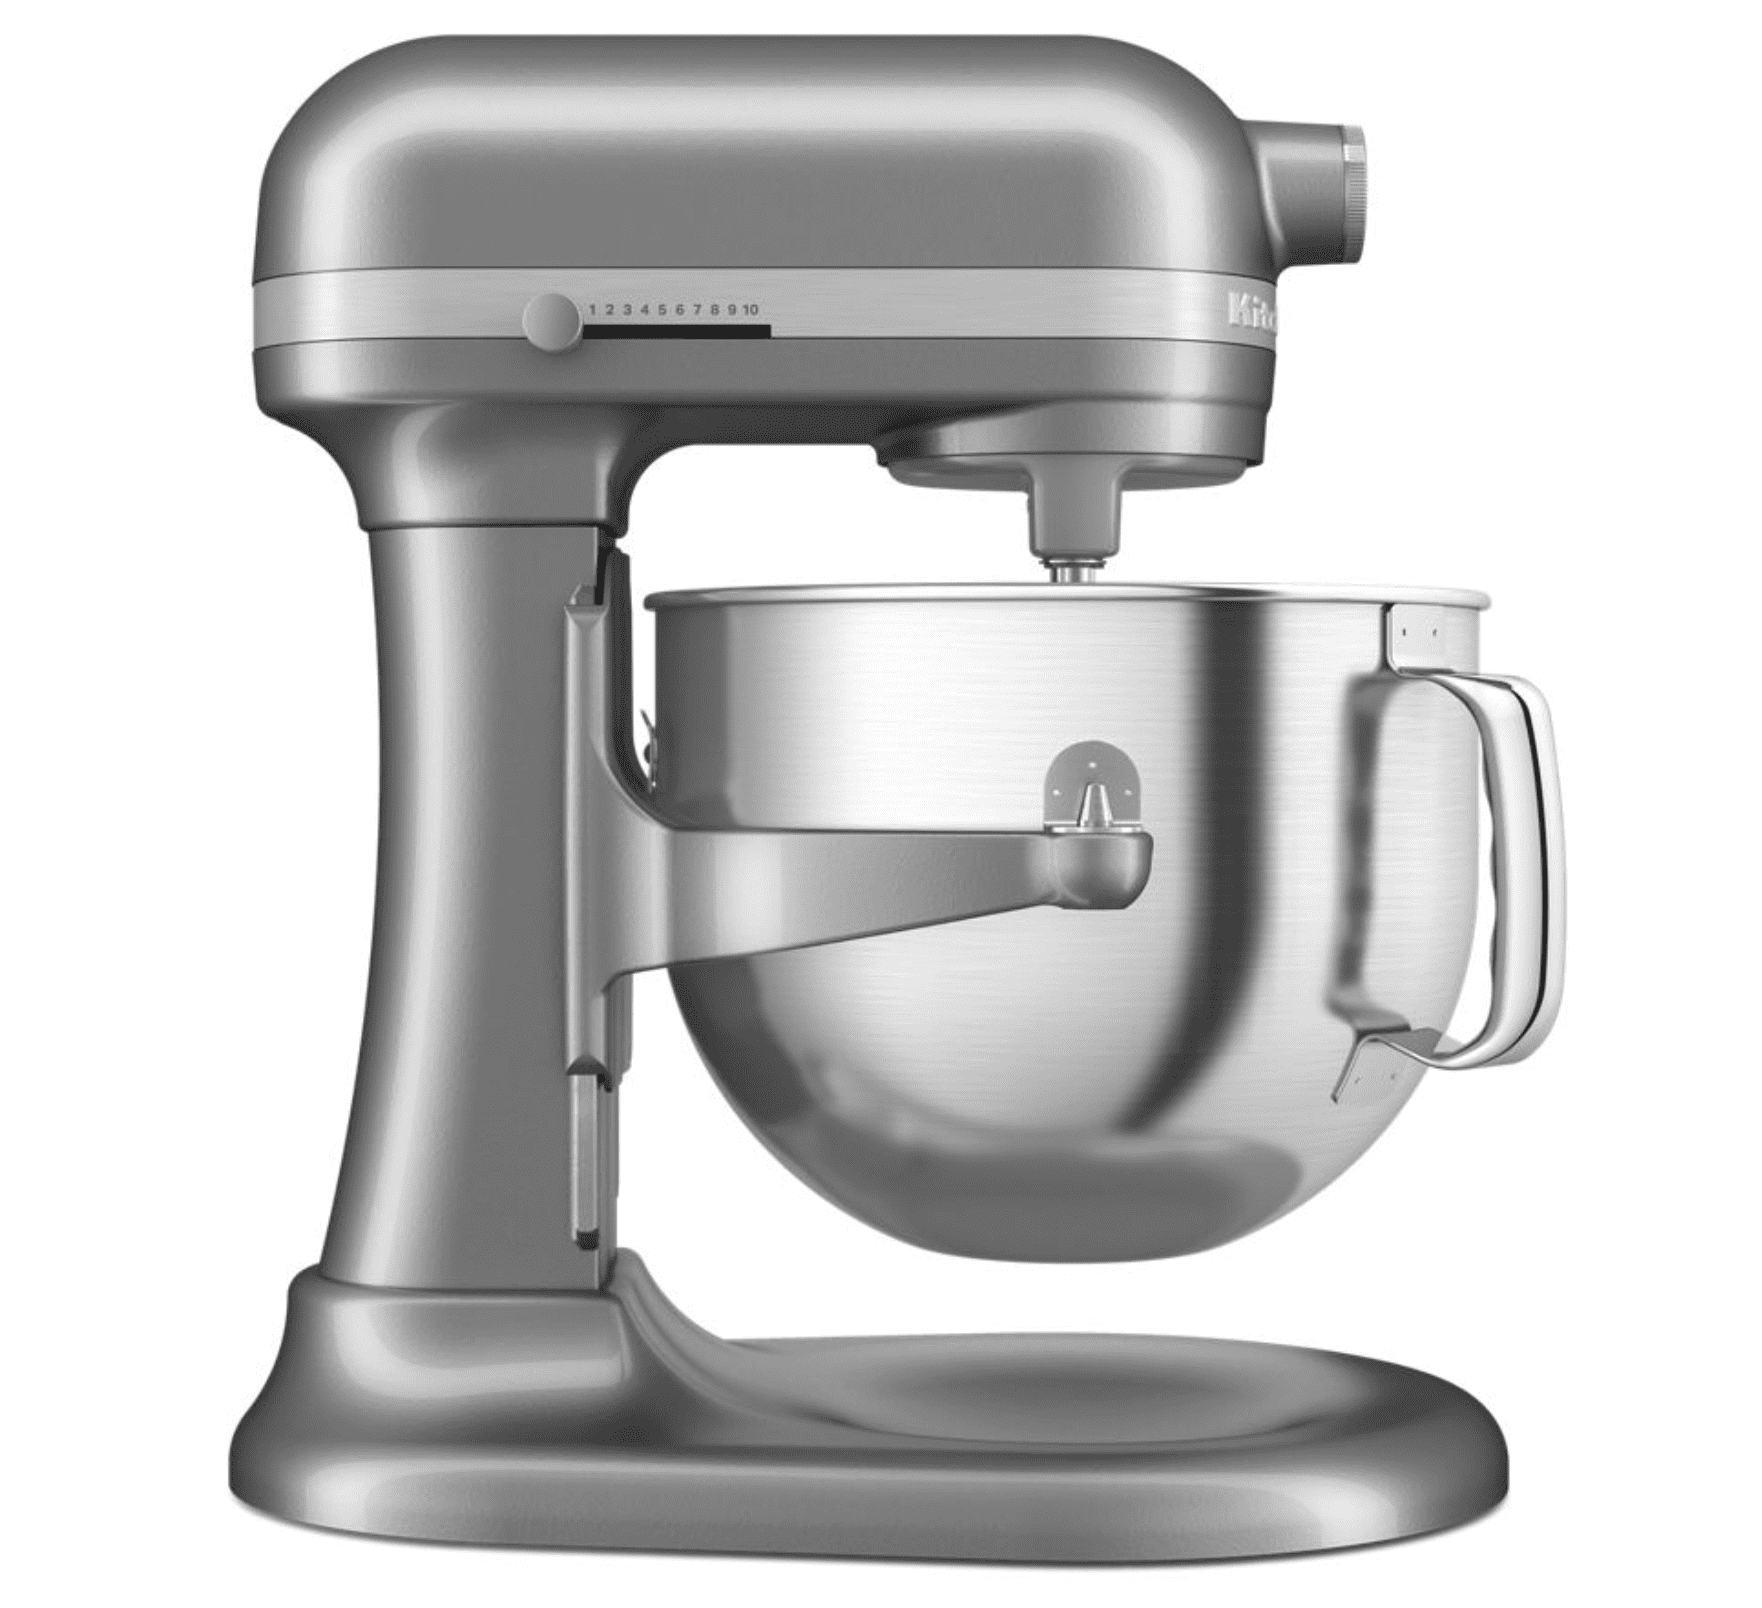 https://cdn.apartmenttherapy.info/image/upload/v1665677662/7%20Quart%20Bowl-Lift%20Stand%20Mixer%20with%20Redesigned%20Premium%20Touchpoints.png